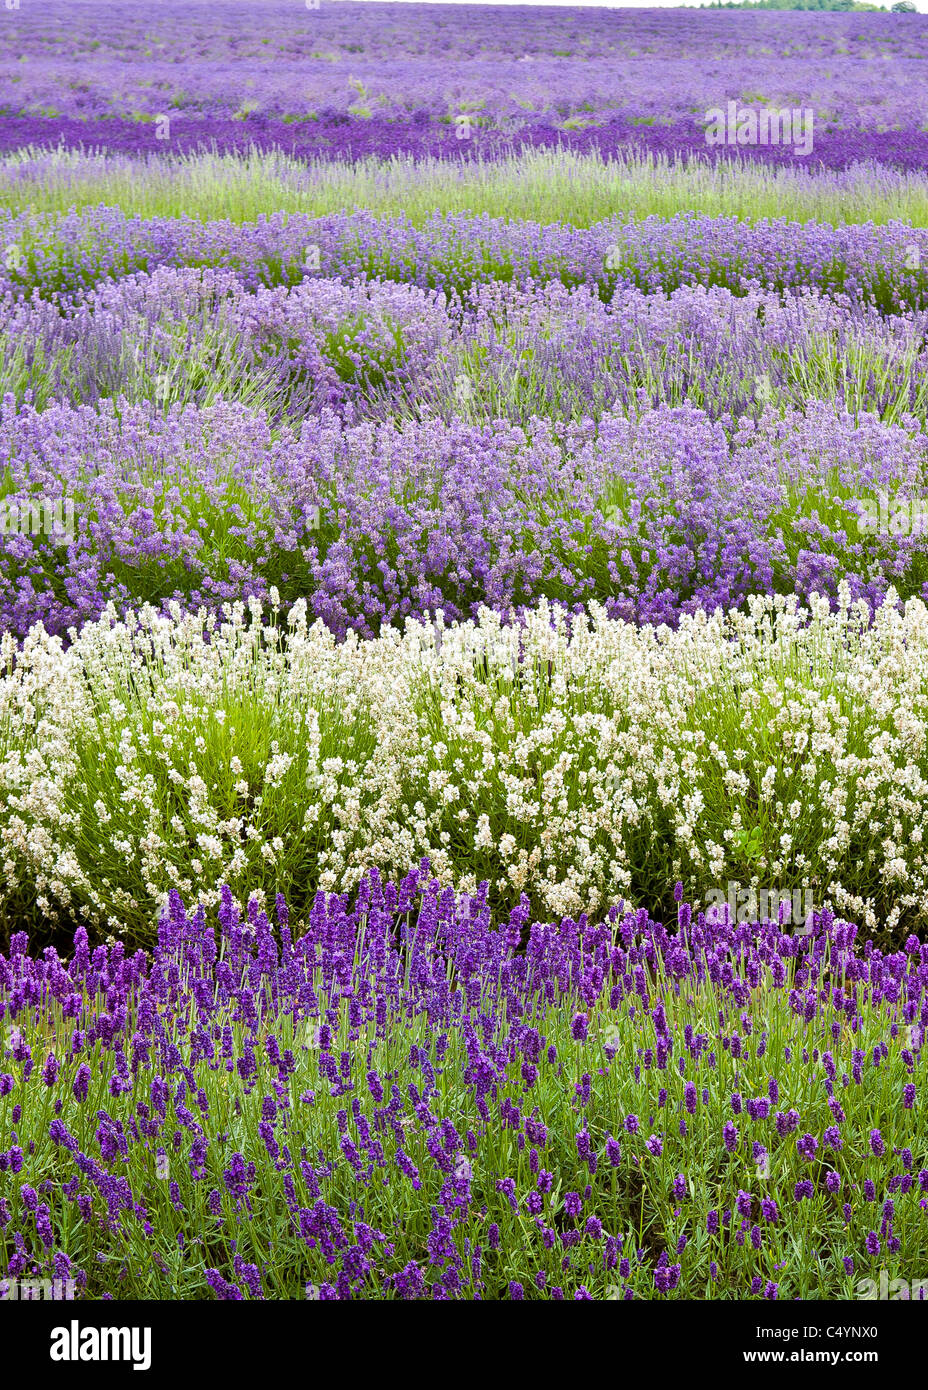 Rows of purple and white lavender Stock Photo